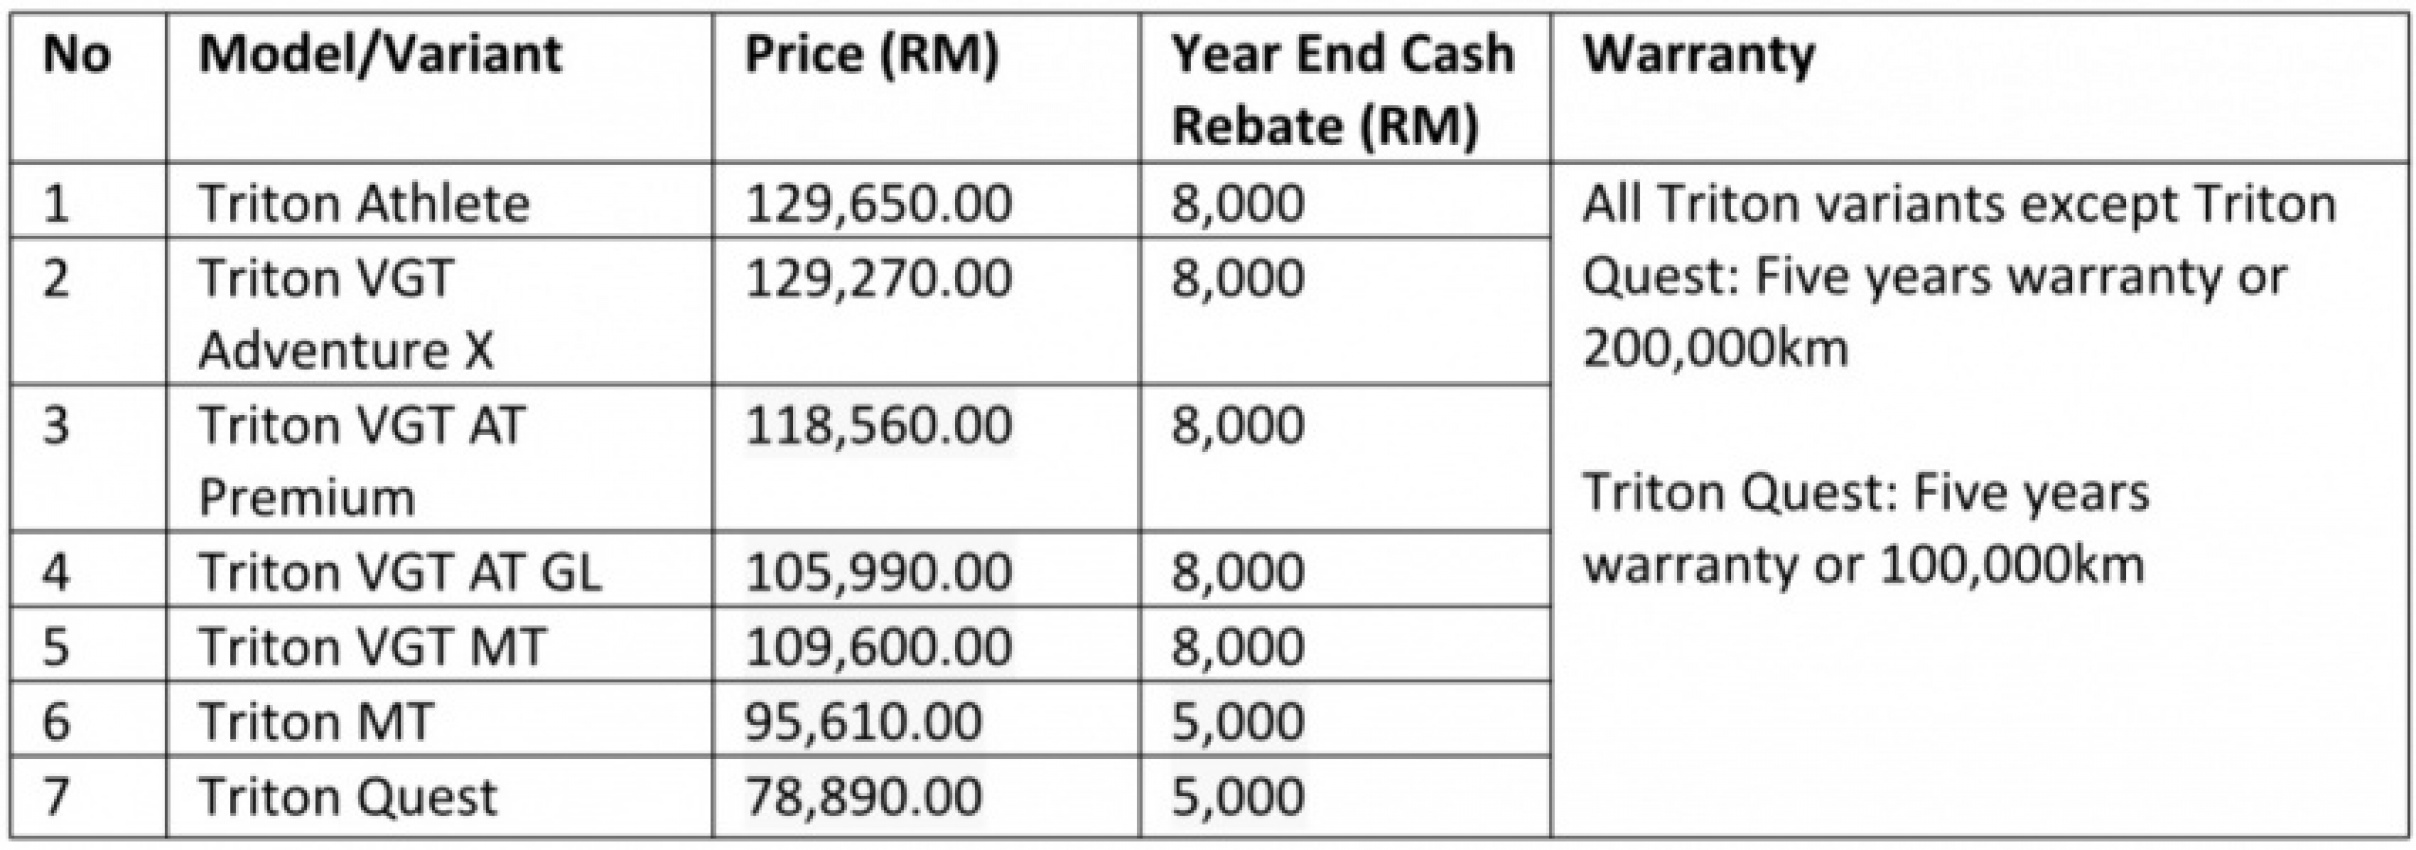 autos, car brands, cars, mitsubishi, malaysia, mitsubishi motors malaysia, pick up truck, promotions, rebates, mitsubishi motors malaysia offers rebates of up to rm8k for outlander, asx and triton